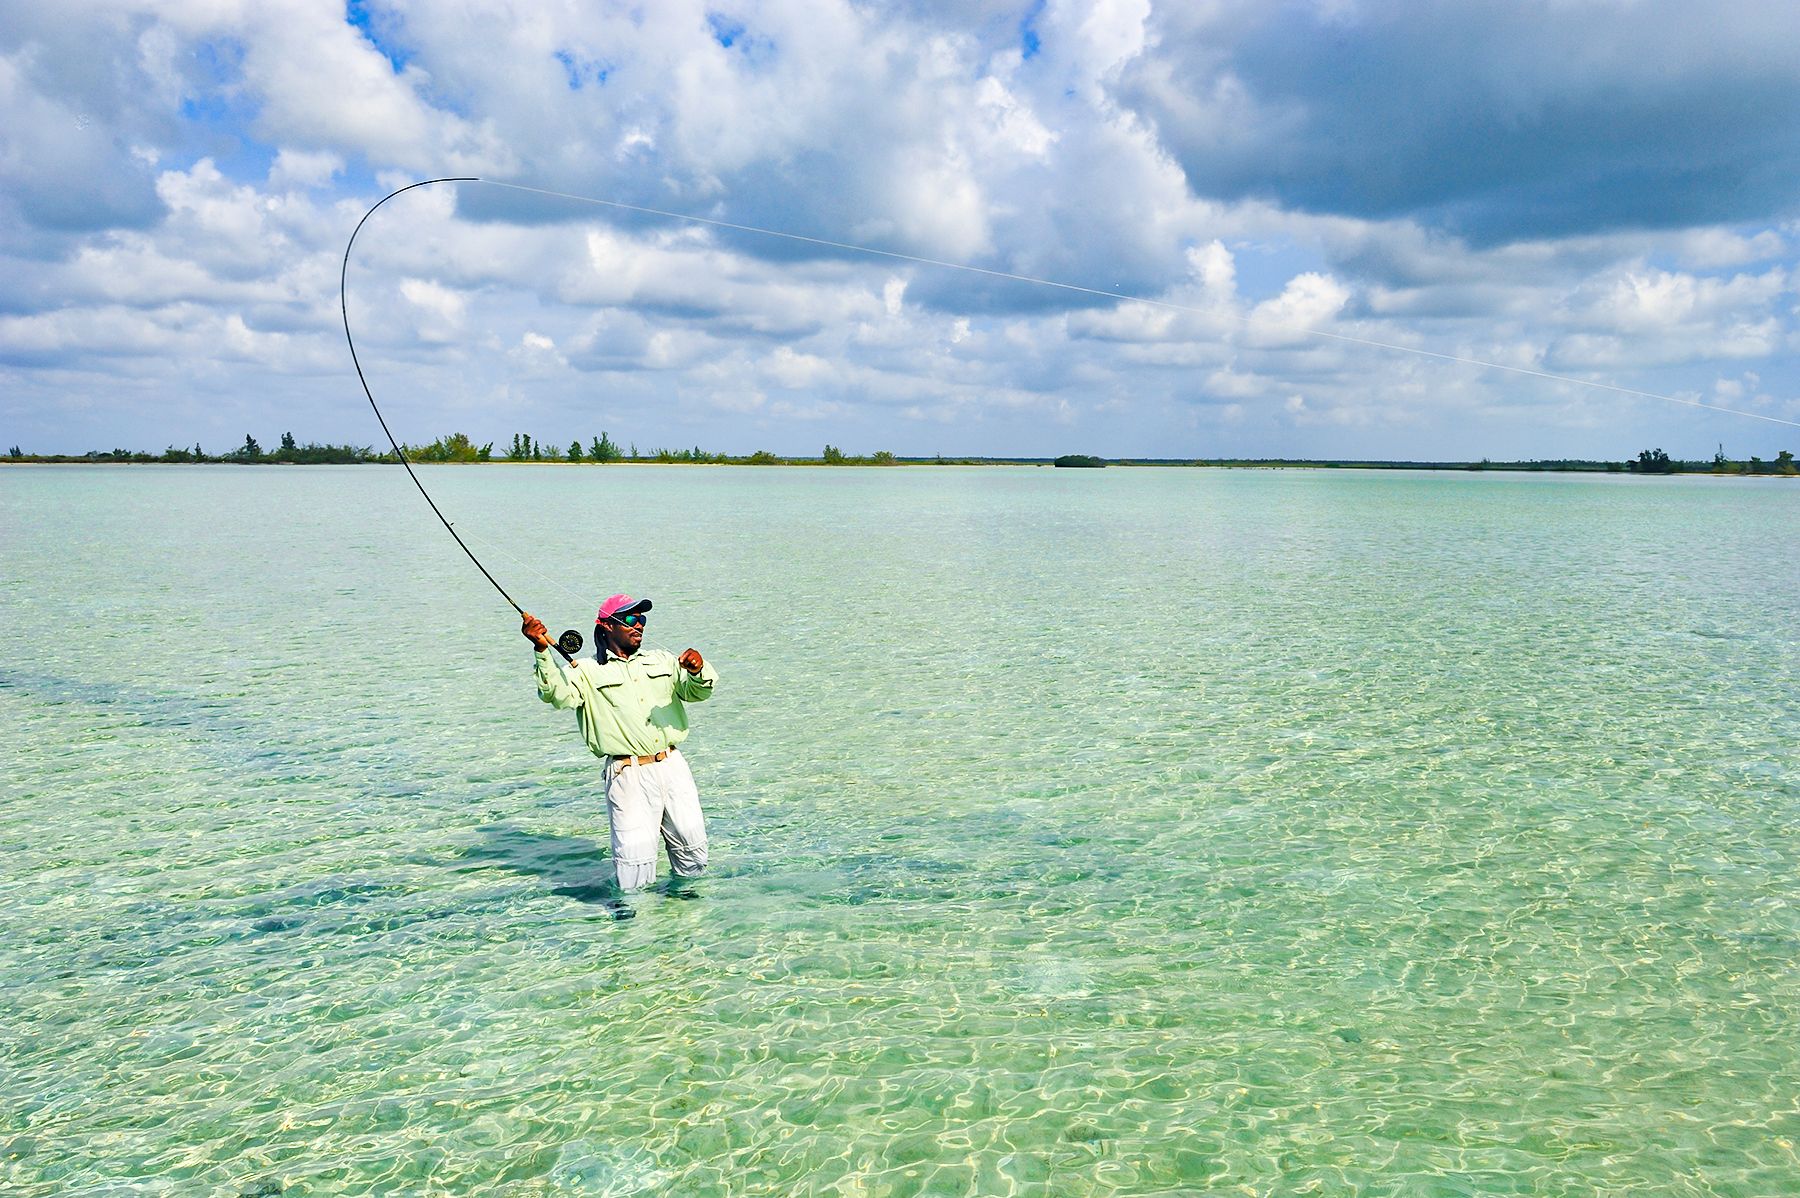 Want to be a fly fishing guide? Read this first.